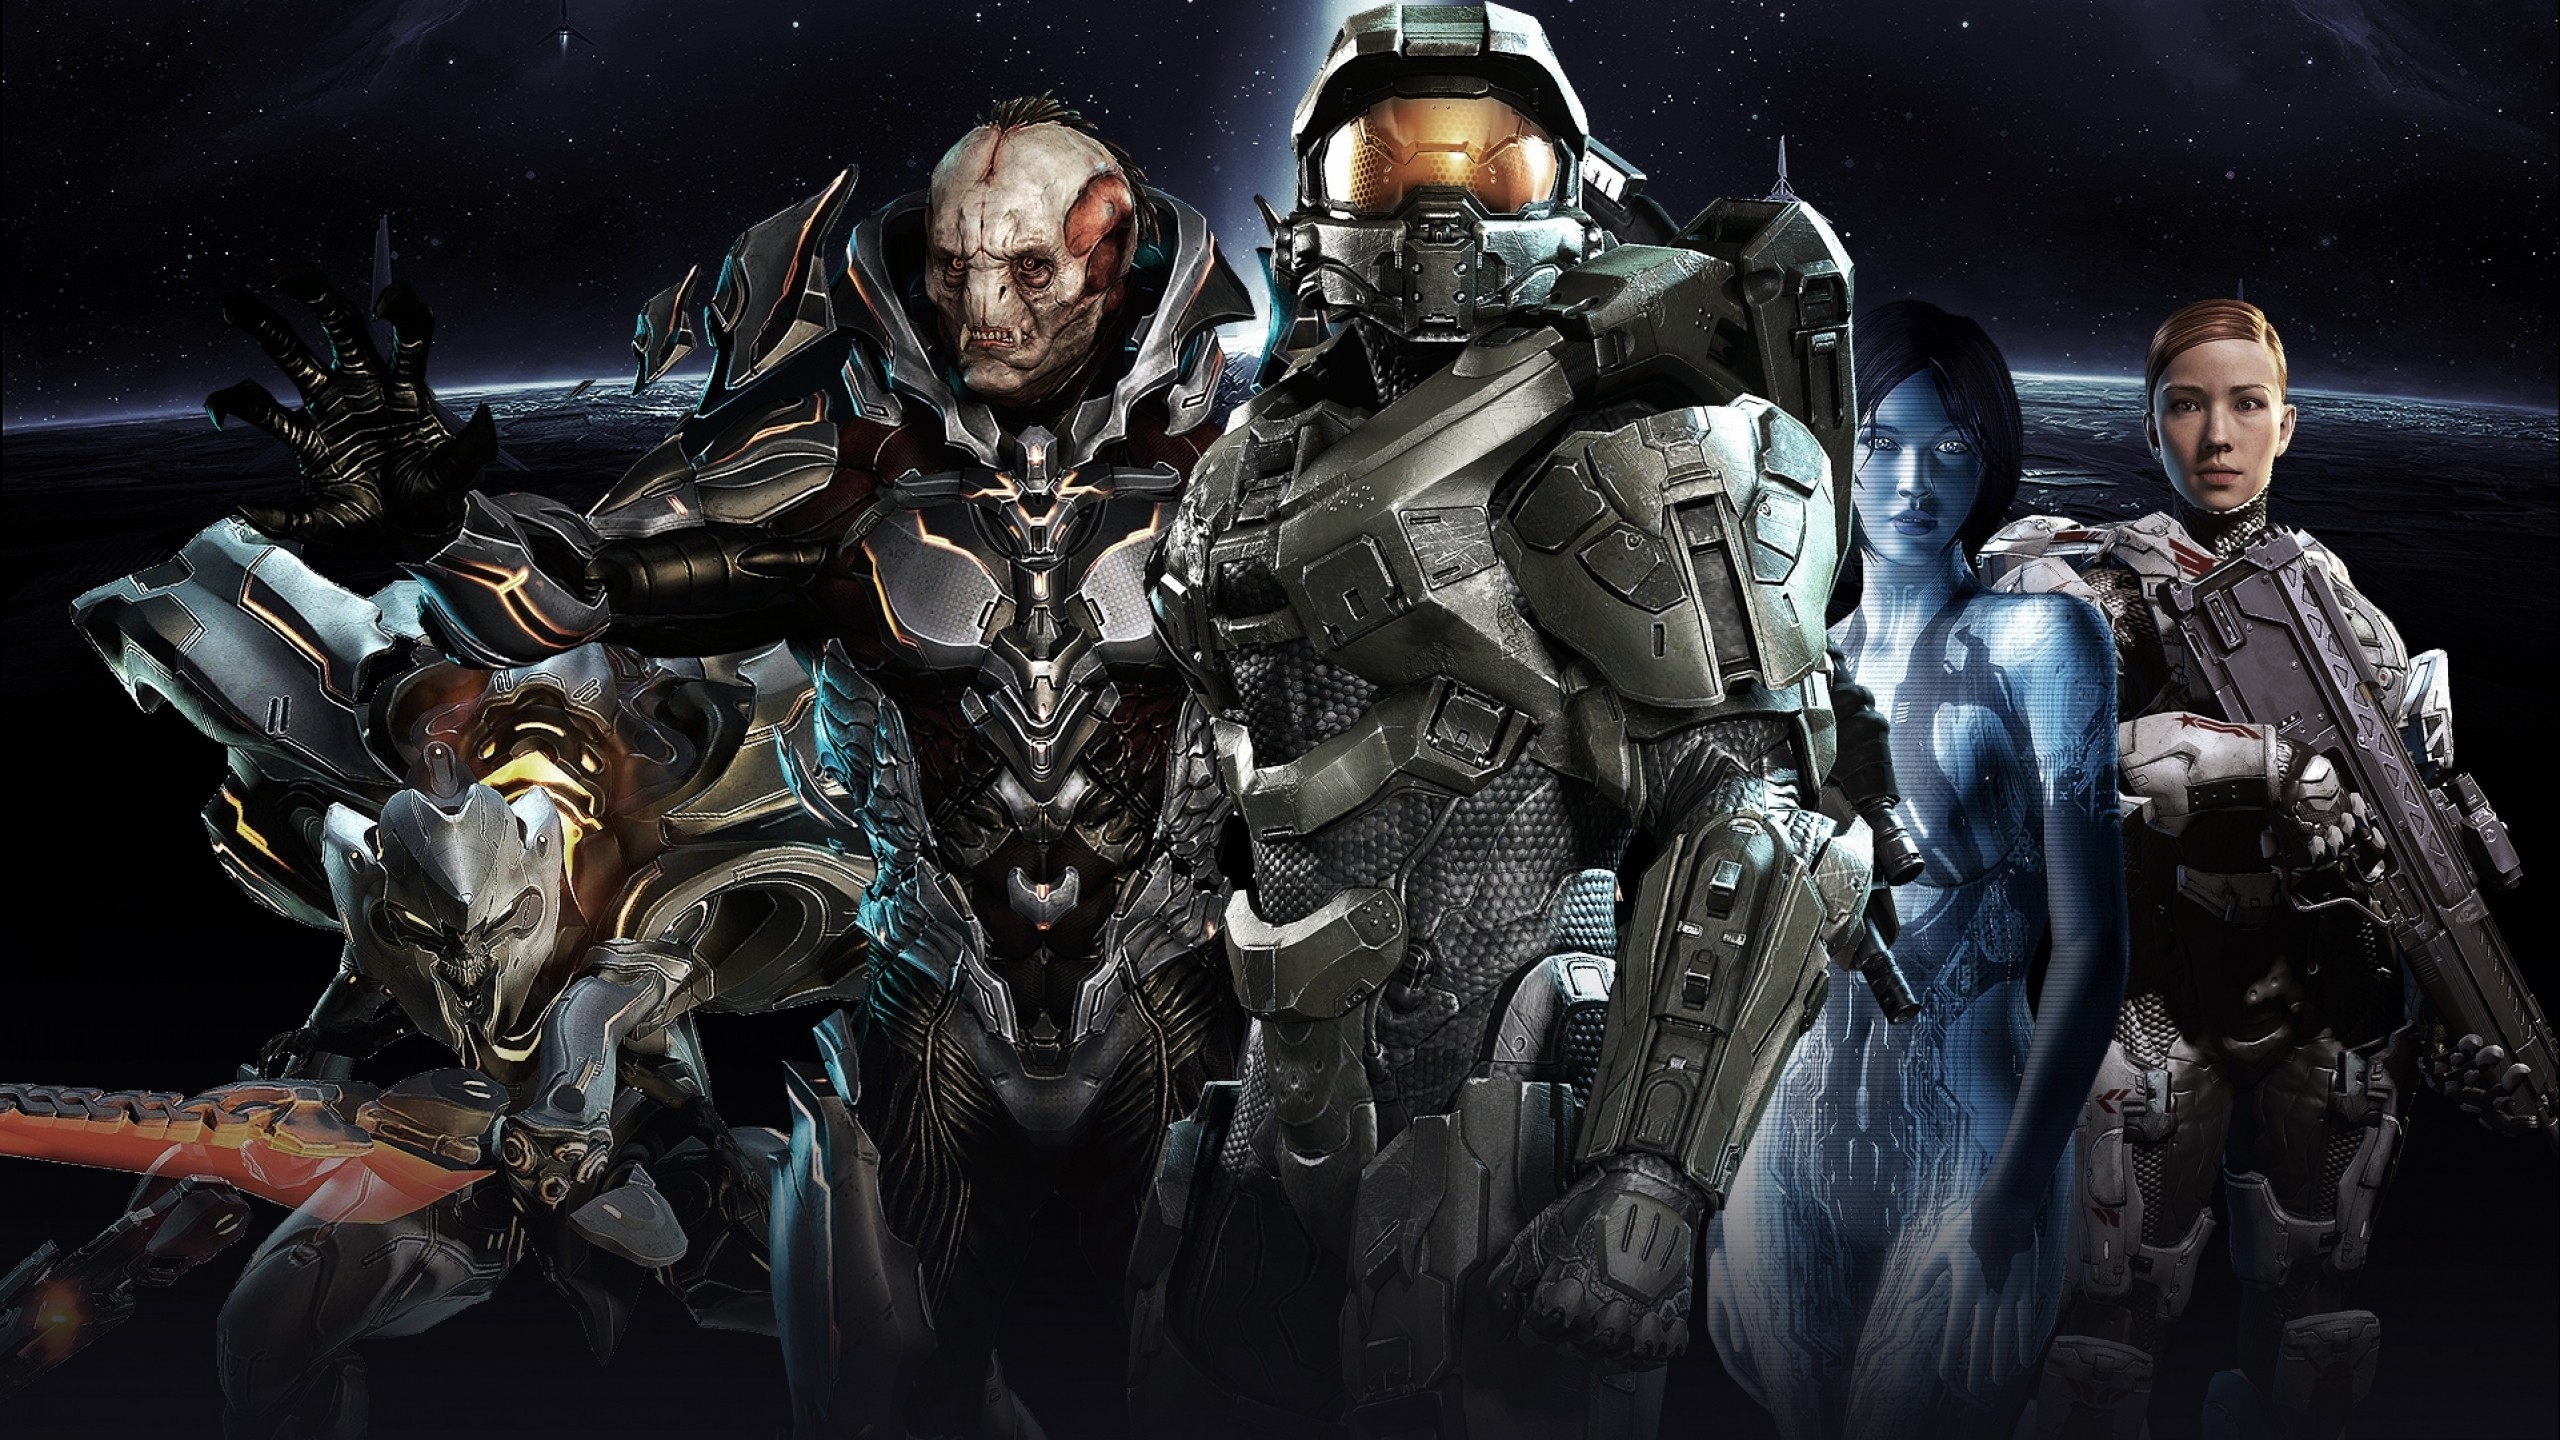 Halo Master Chief Halo 4 Xbox One Halo Master Chief Collection Cortana Video Games 2560x1440